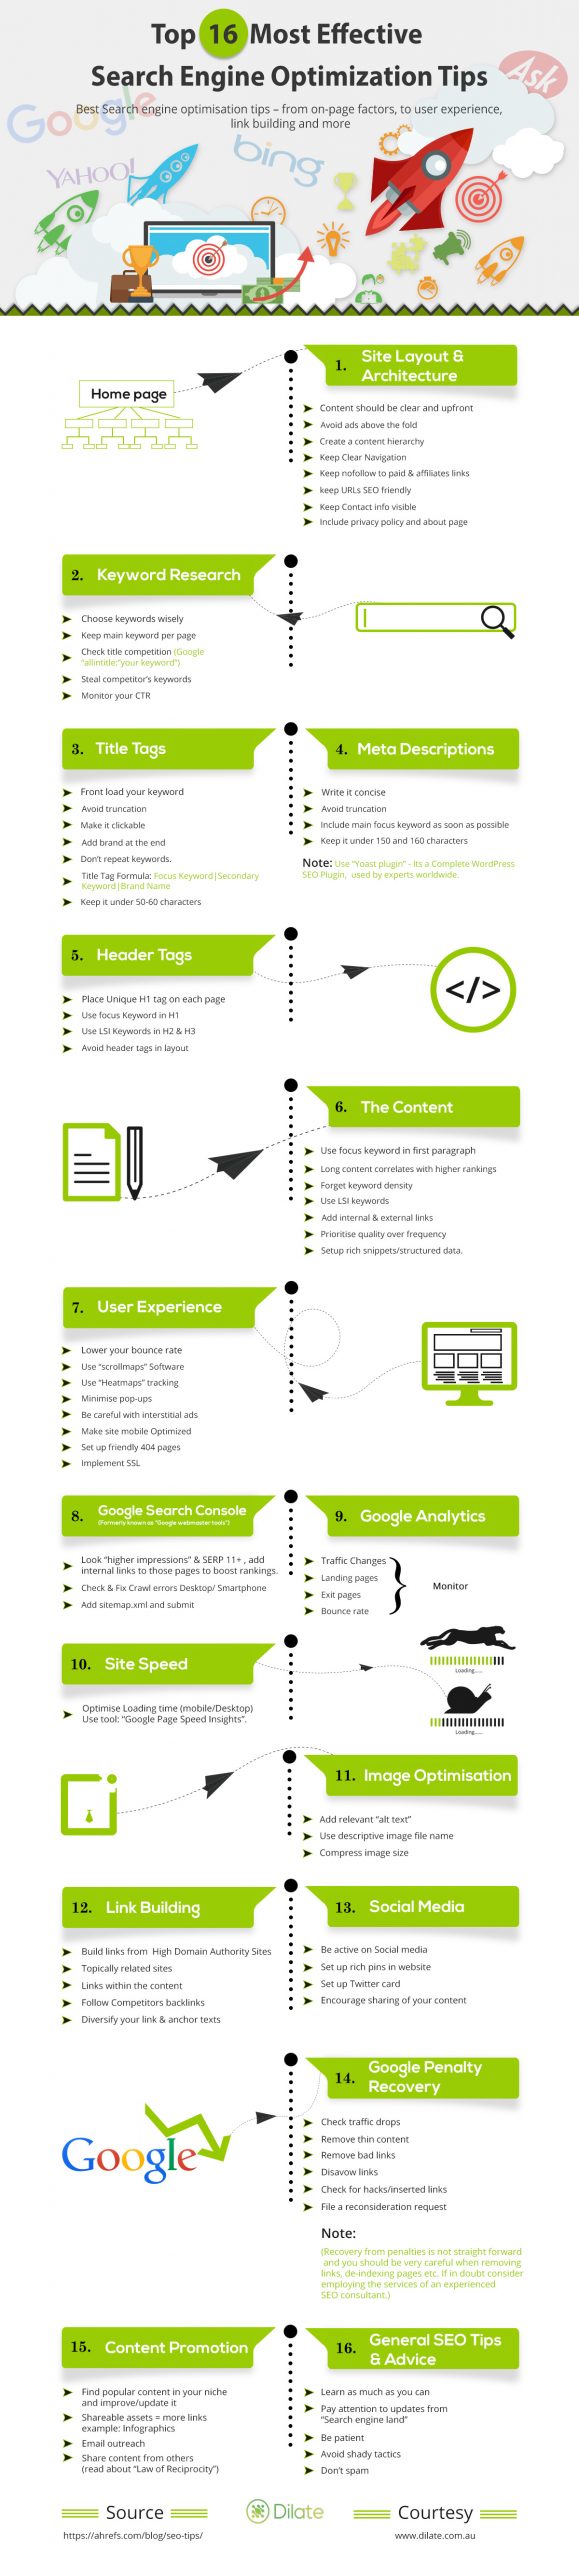 Top 16 Most Effective Search Engine Optimization Tips 2016 infographic